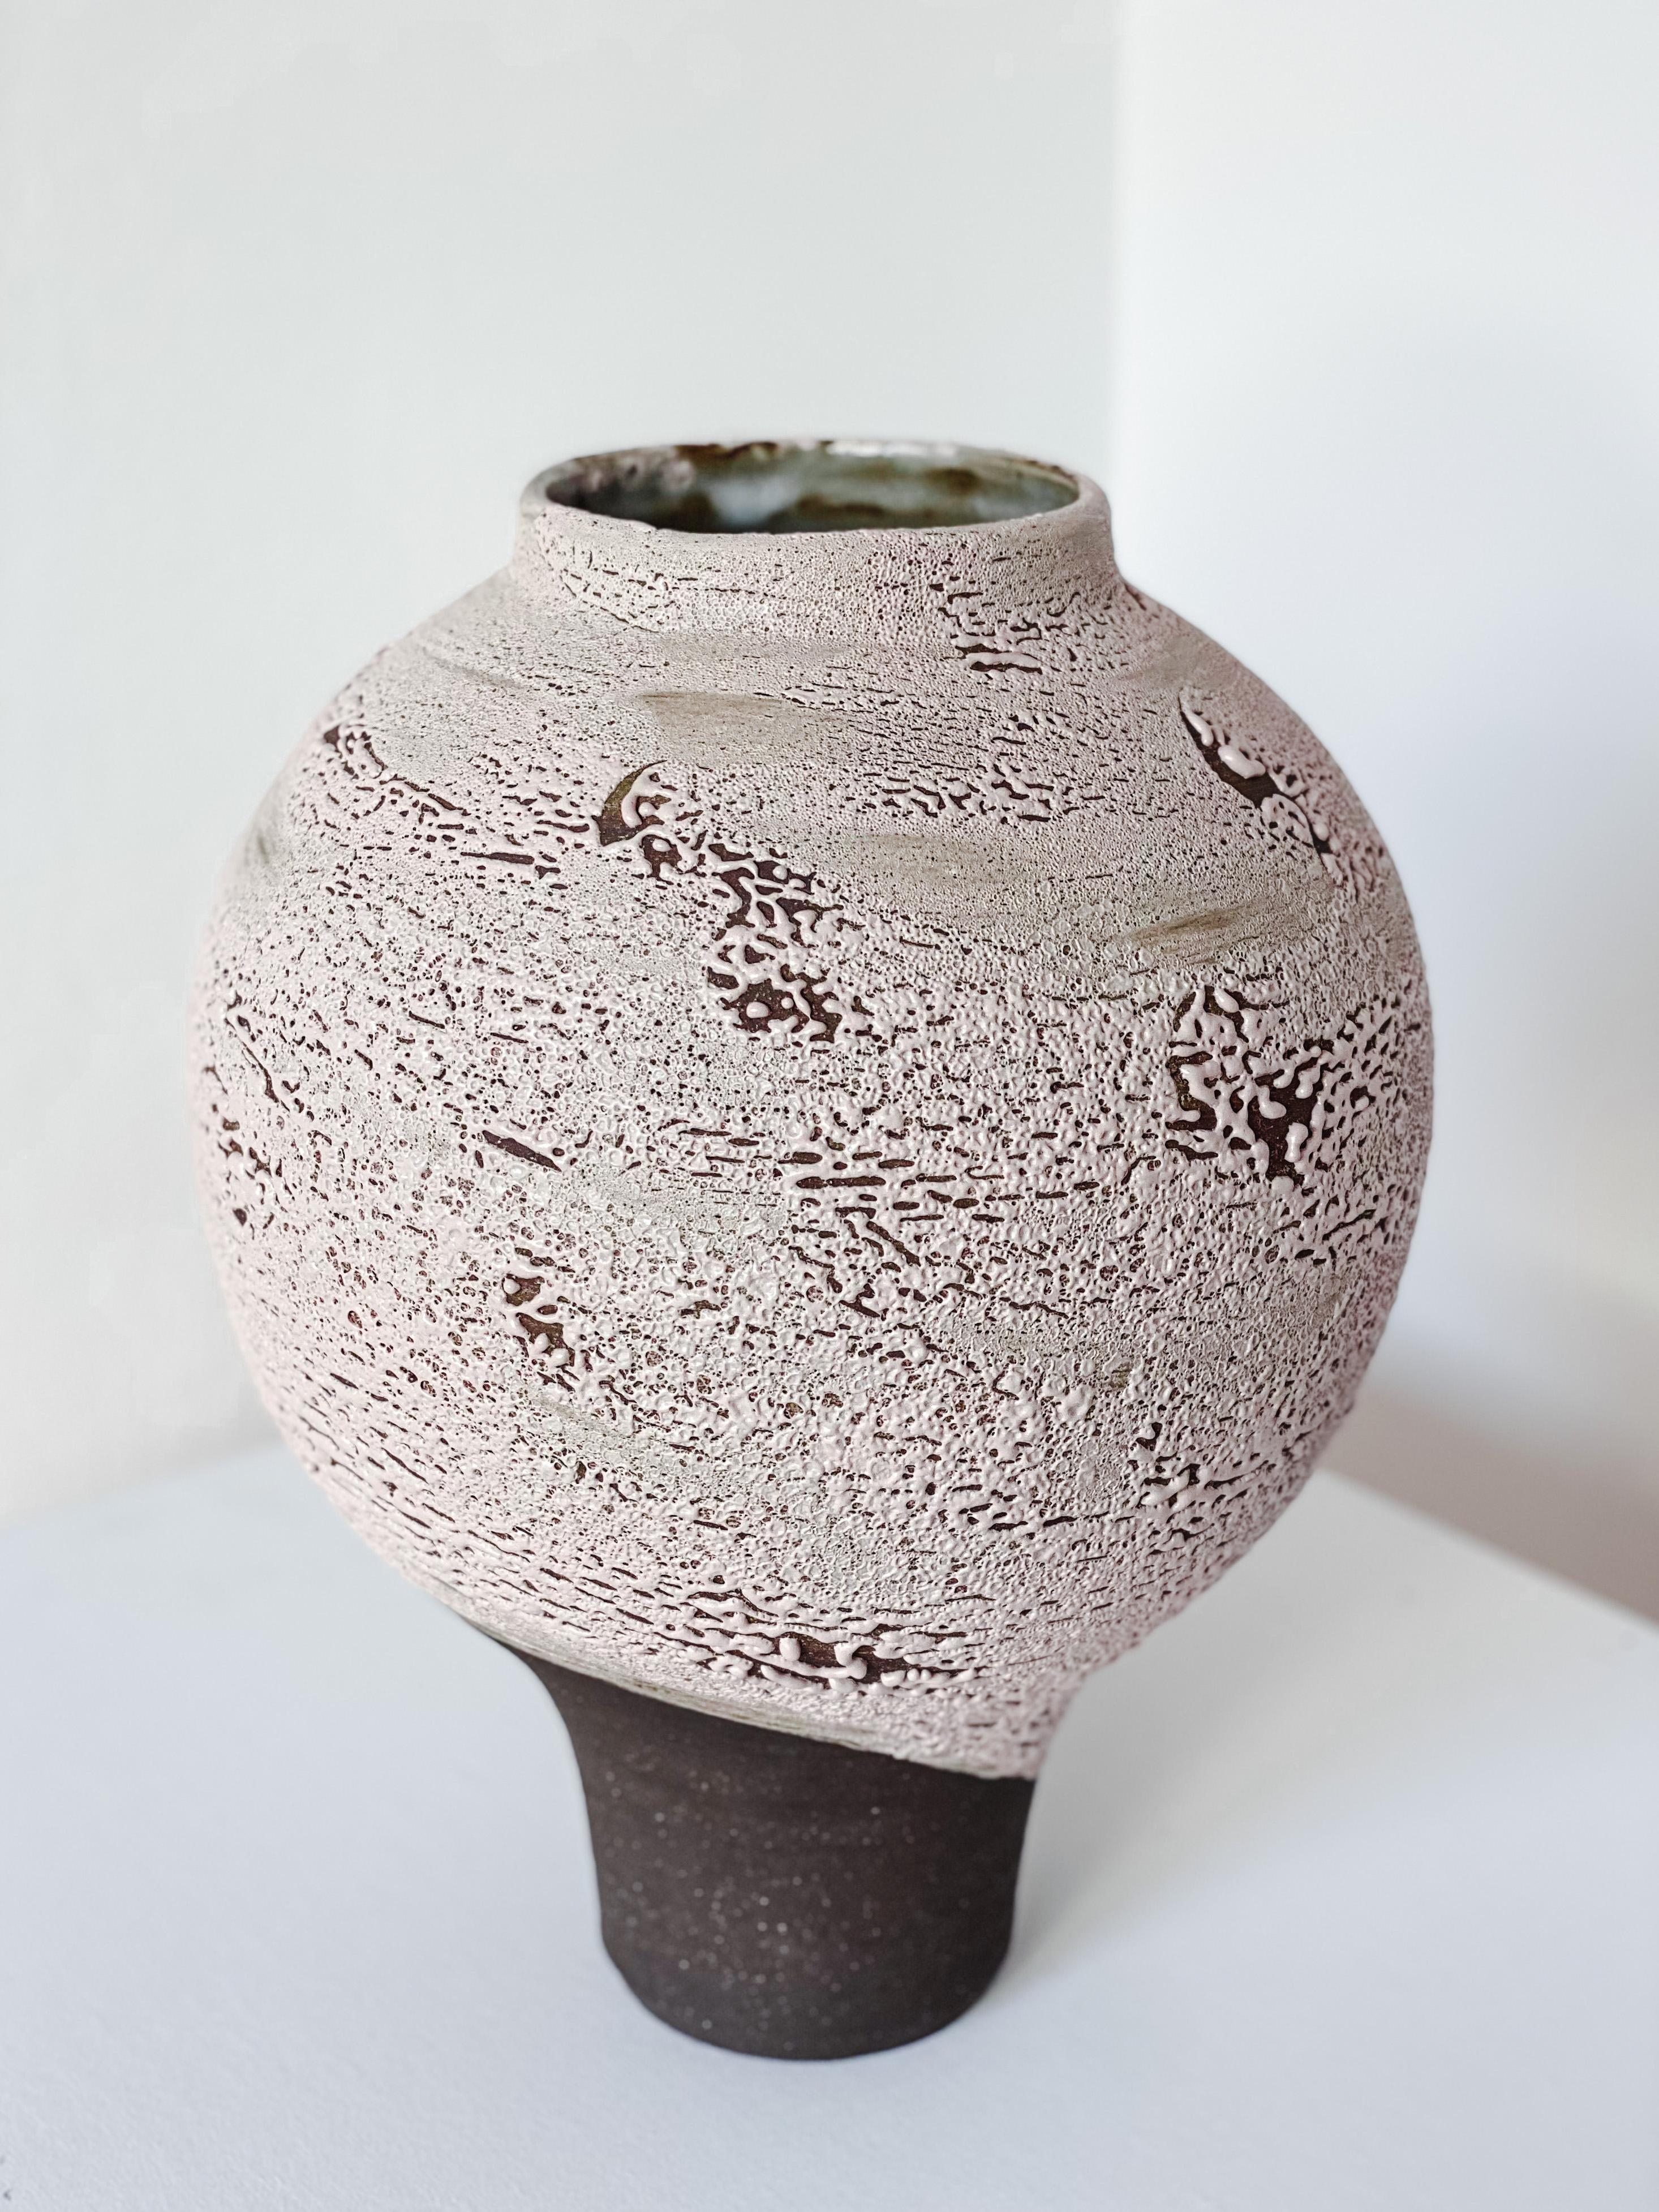 Rosè vase by Arina Antonova, 2021
Dimensions: H 40 x D 36 cm
Materials: Black stoneware, soft pink glaze.

Born in Sewastopol (Crimea), I was surrounded by the natural variety of the coastal Black Sea views with rocky beaches and picturesque